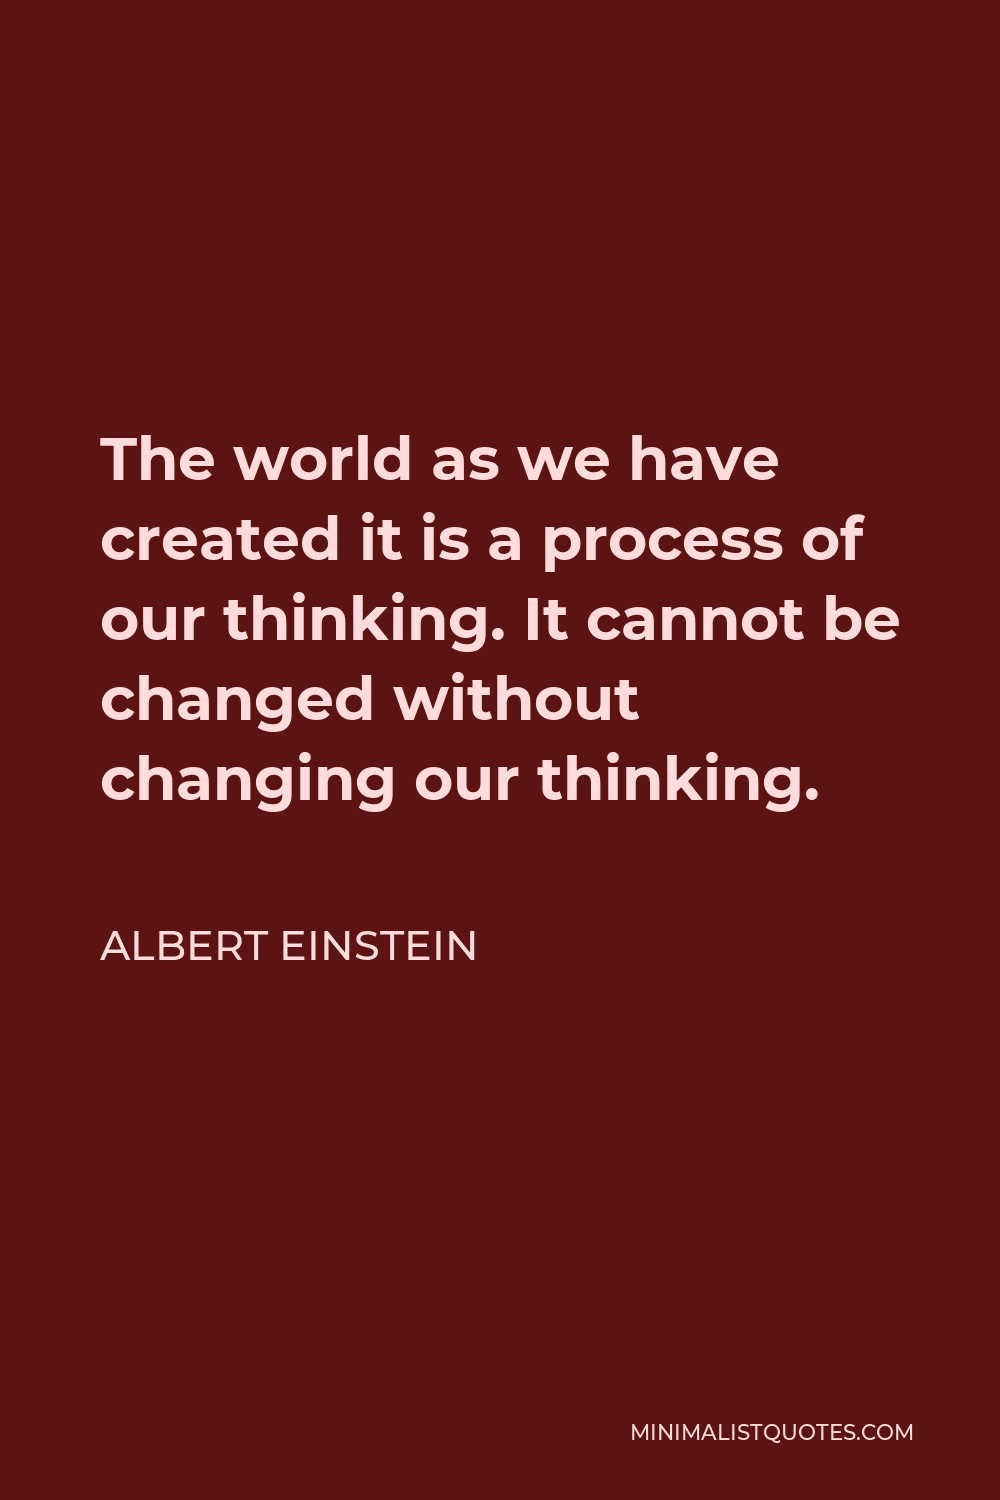 Albert Einstein Quote - The world as we have created it is a process of our thinking. It cannot be changed without changing our thinking.